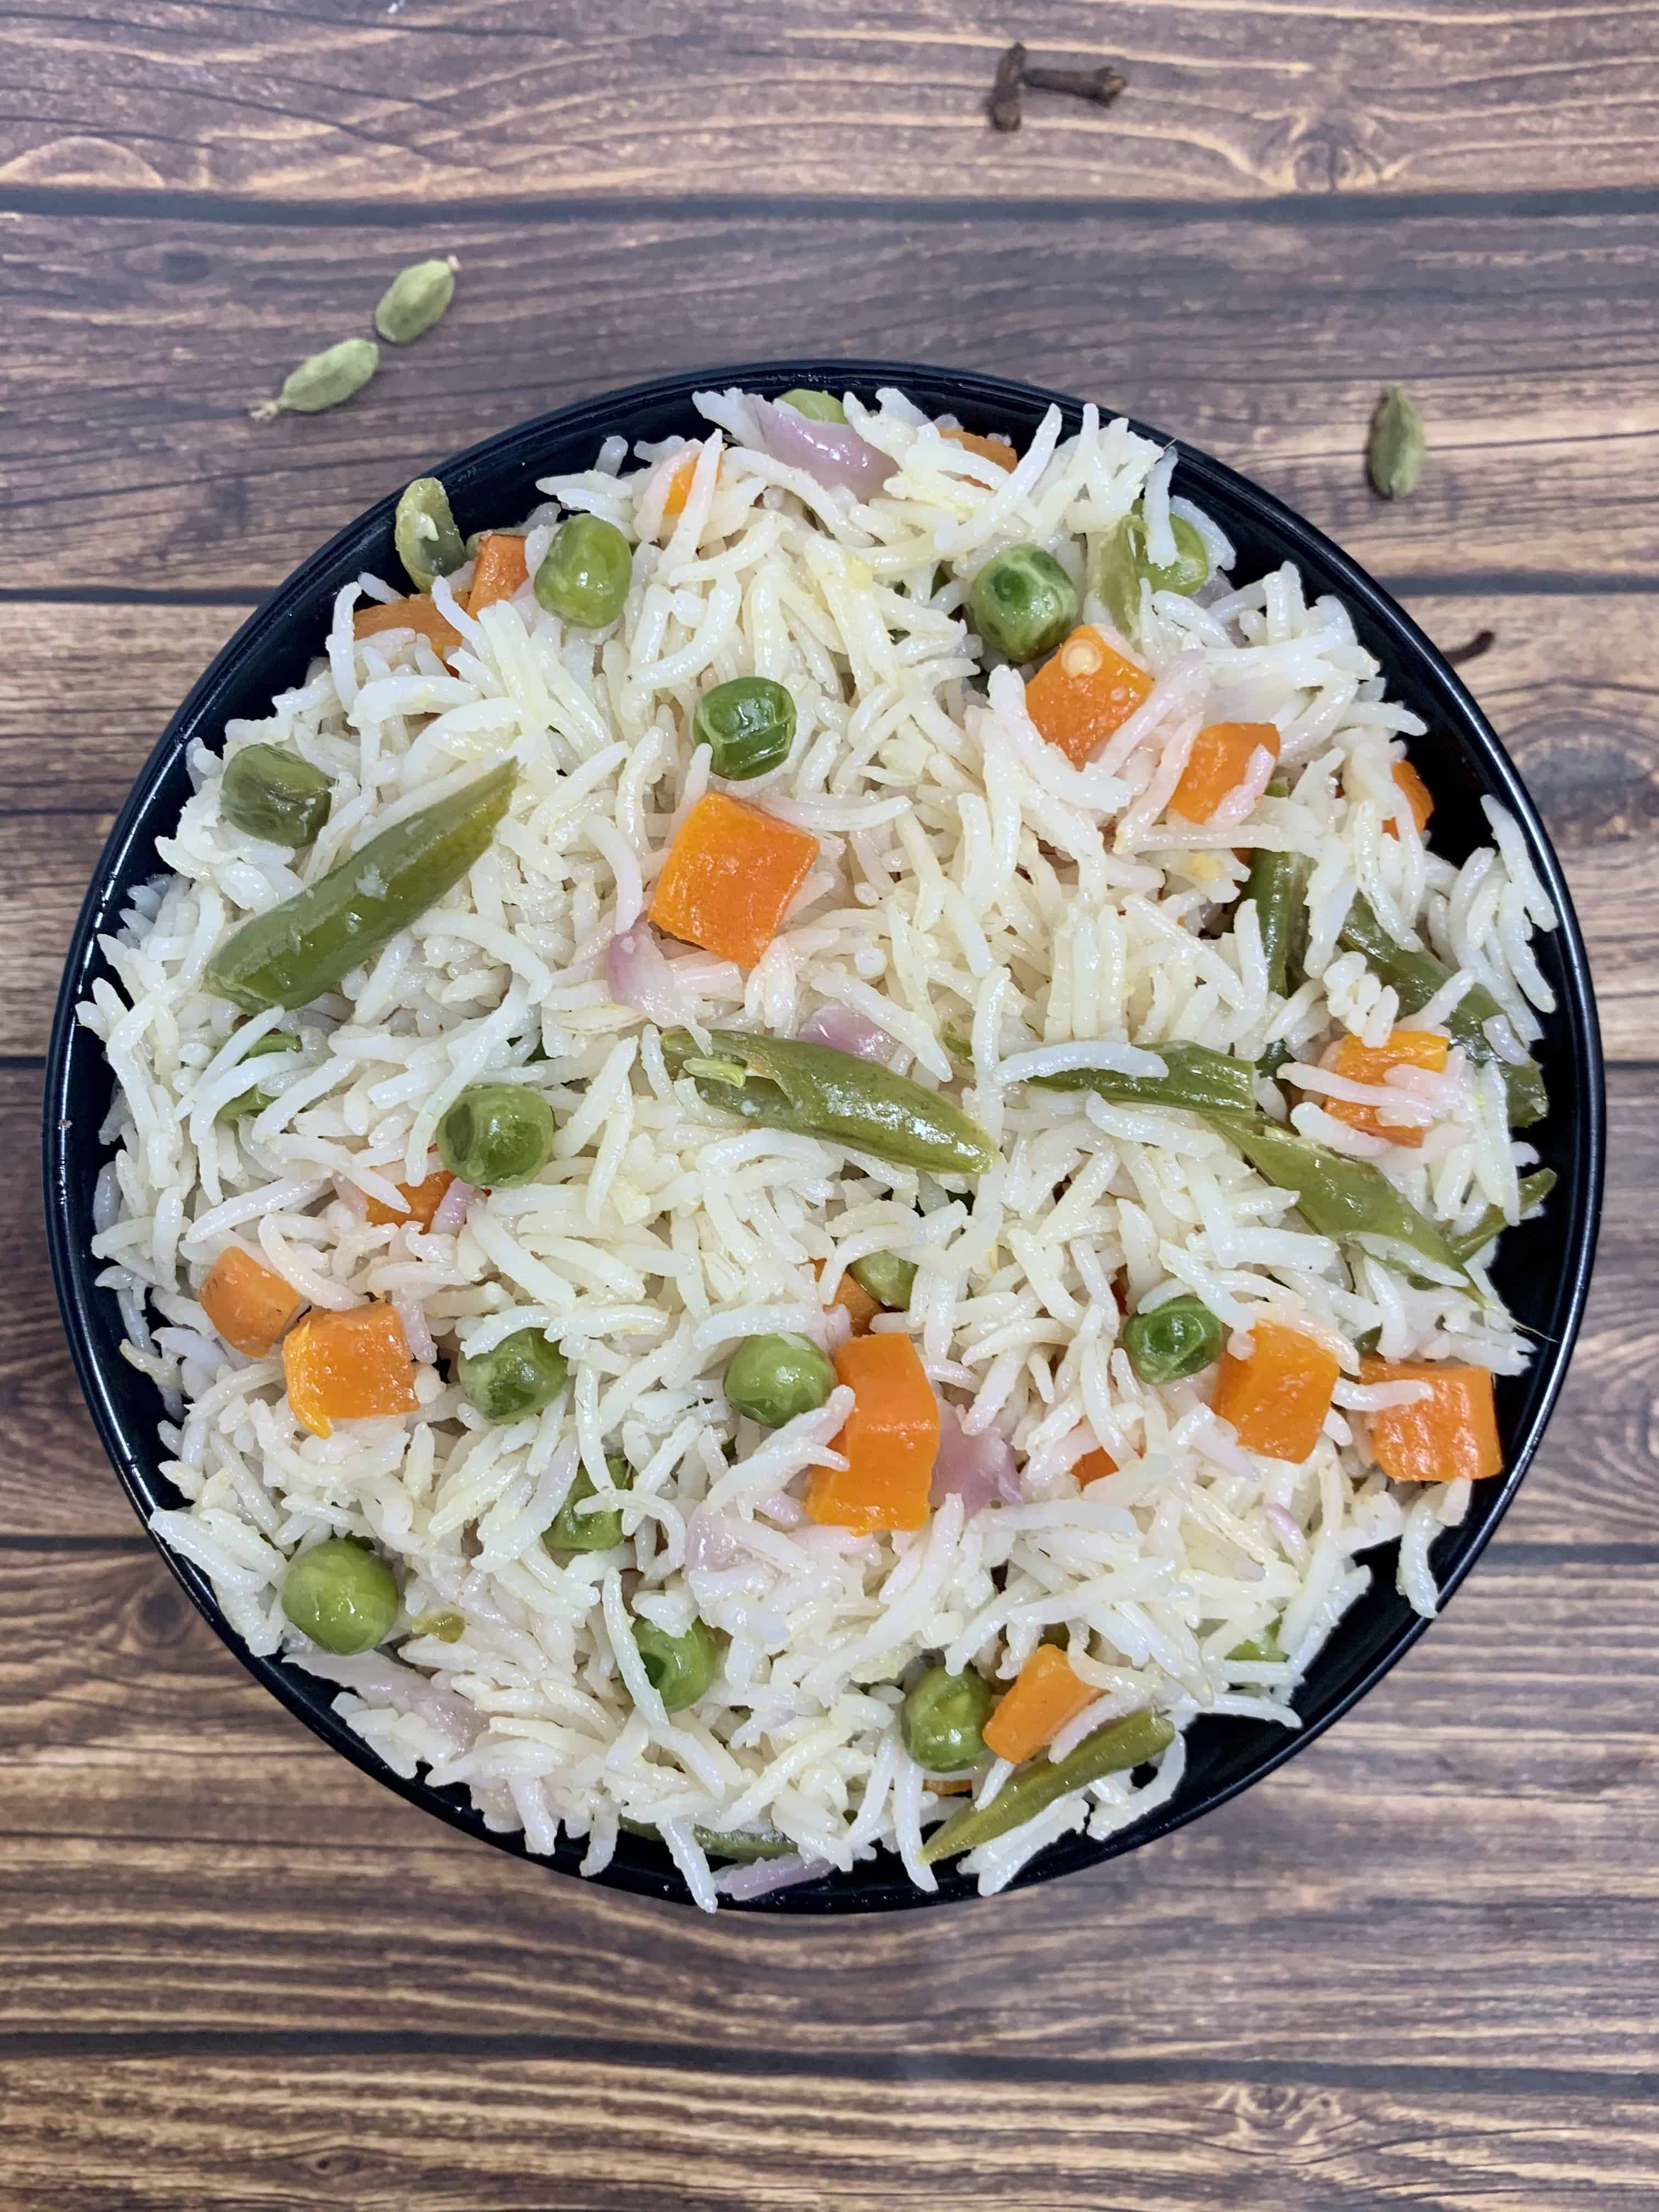 coconut milk pulao served in a black bowl